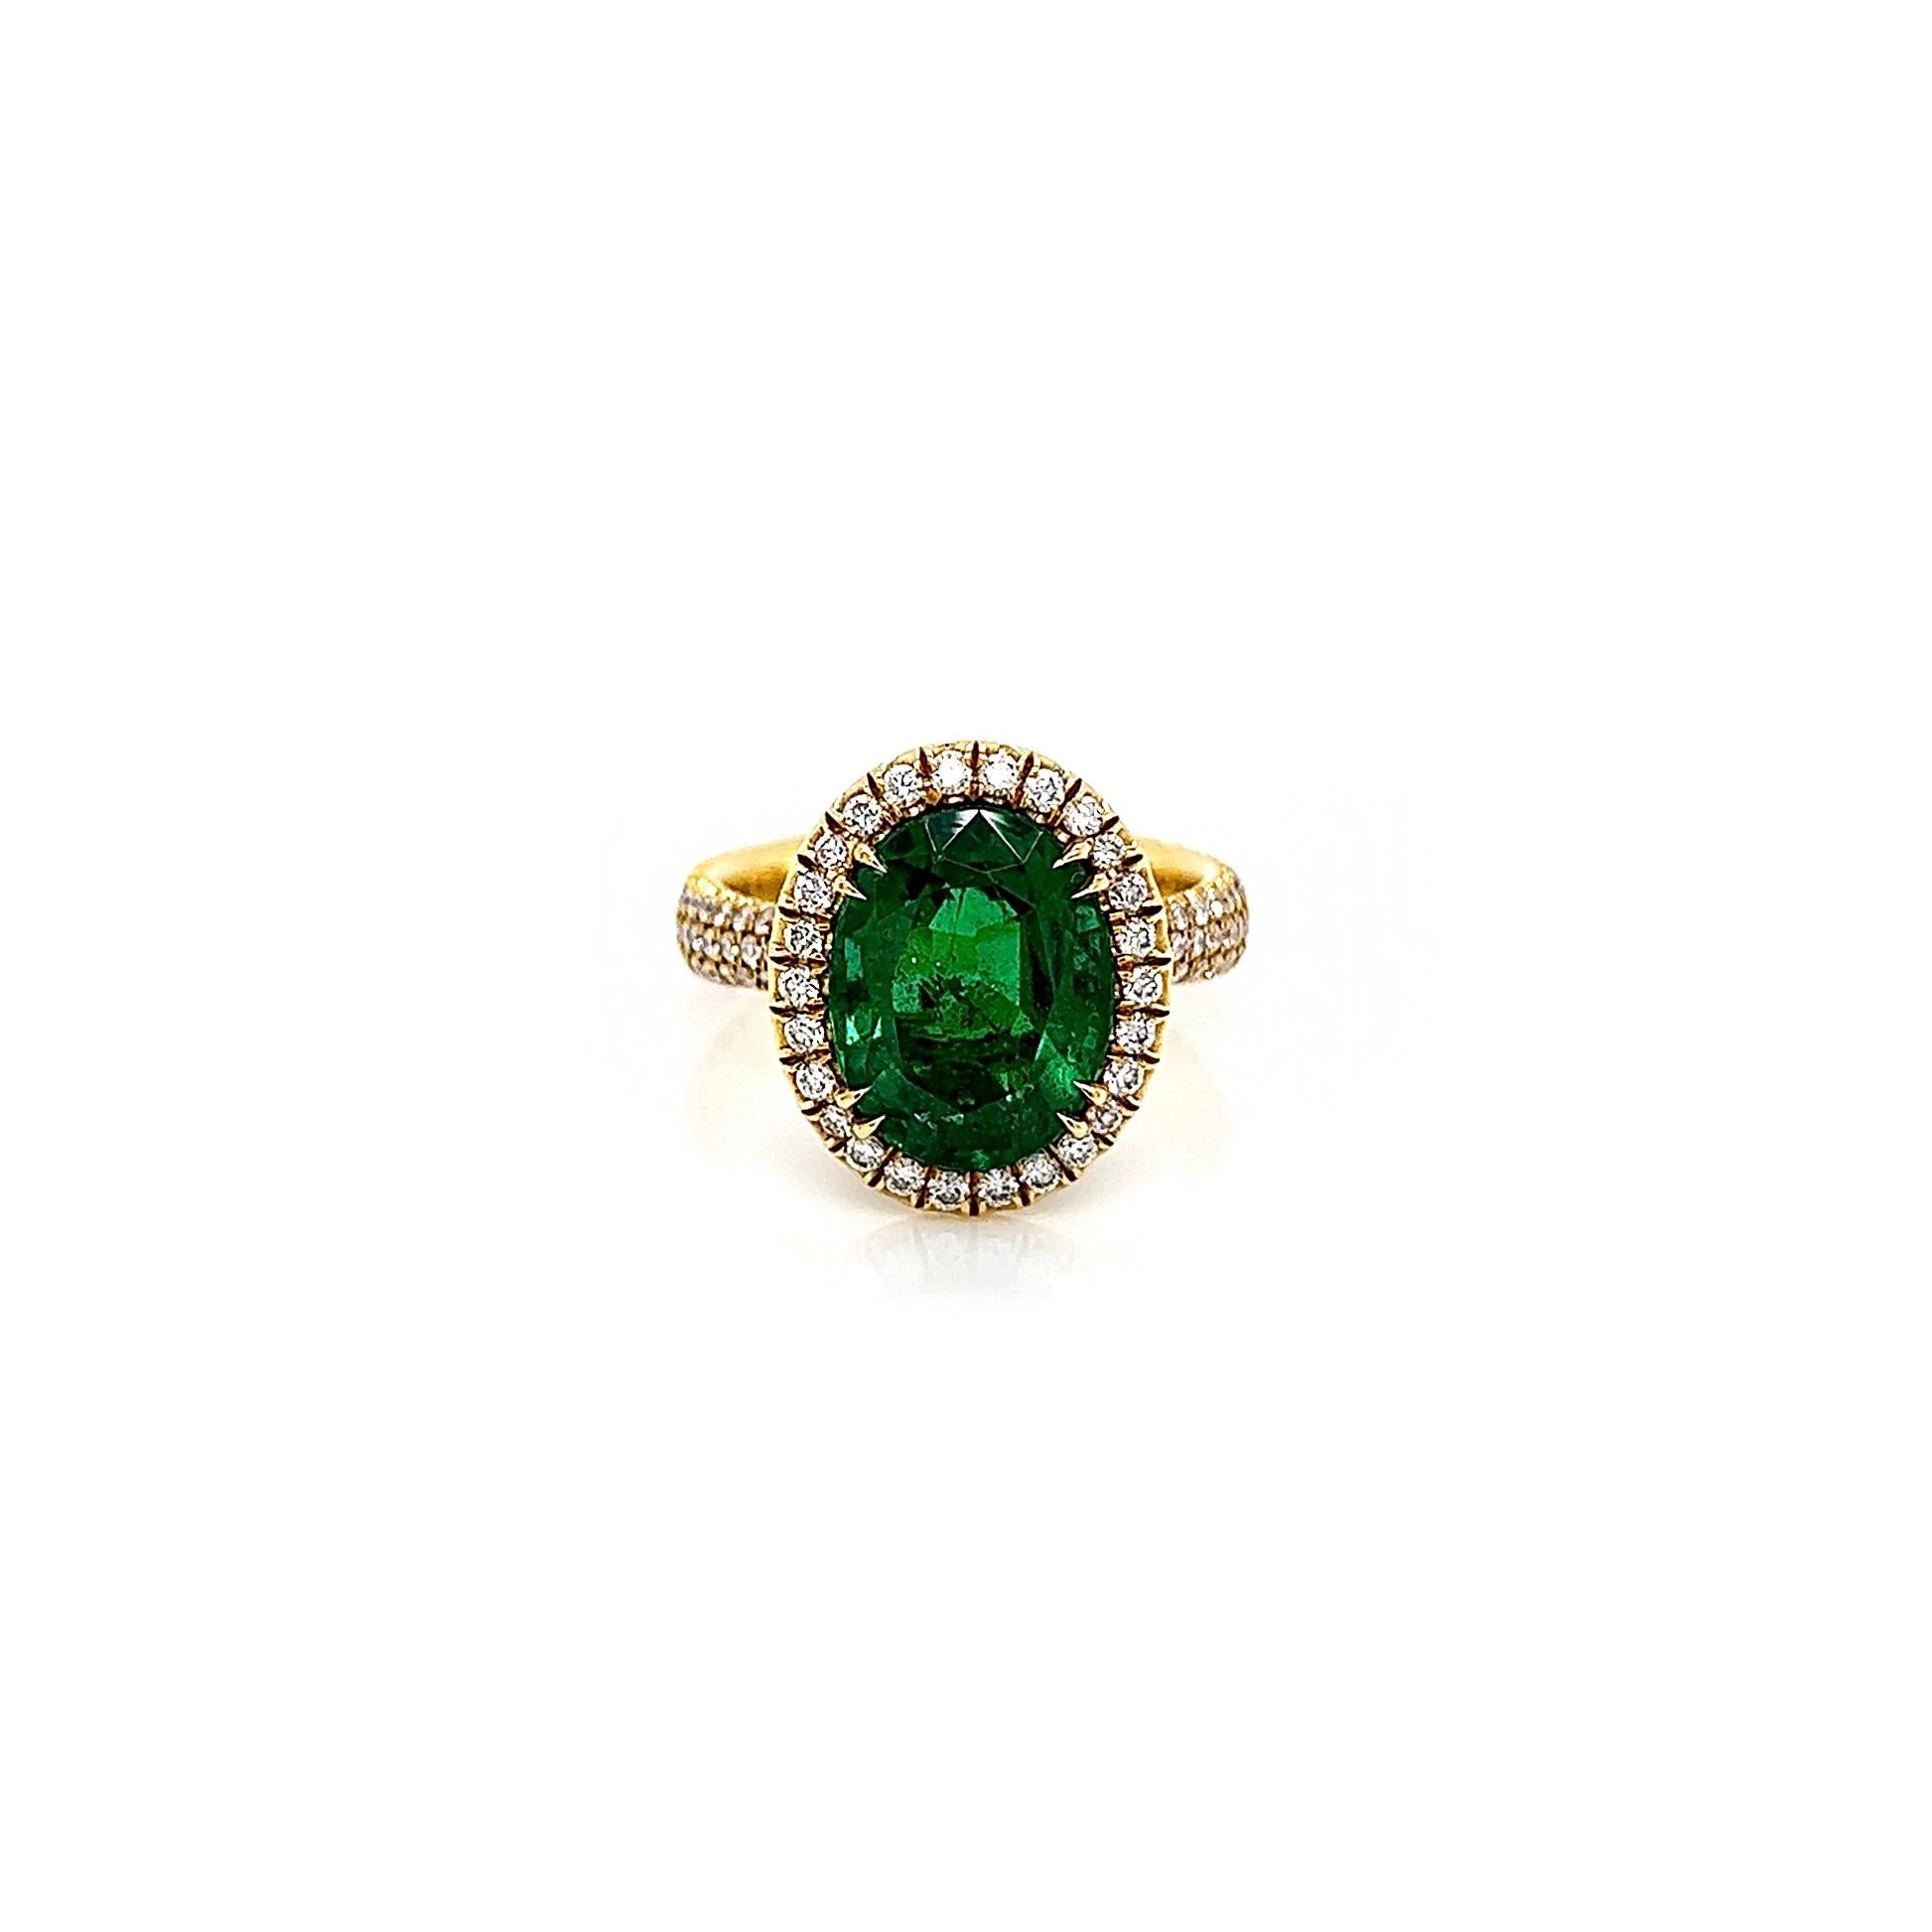 5.32 Total Carat Emerald and Diamond Halo Pave-Set Ladies Ring. GIA Certified.

-Metal Type: 18K Yellow Gold
-4.30 Carat Oval Cut Natural Colombian Beryl Emerald, GIA Certified 
-Emerald Color: Green
-1.02 Carat Round Natural side Diamonds. F-G